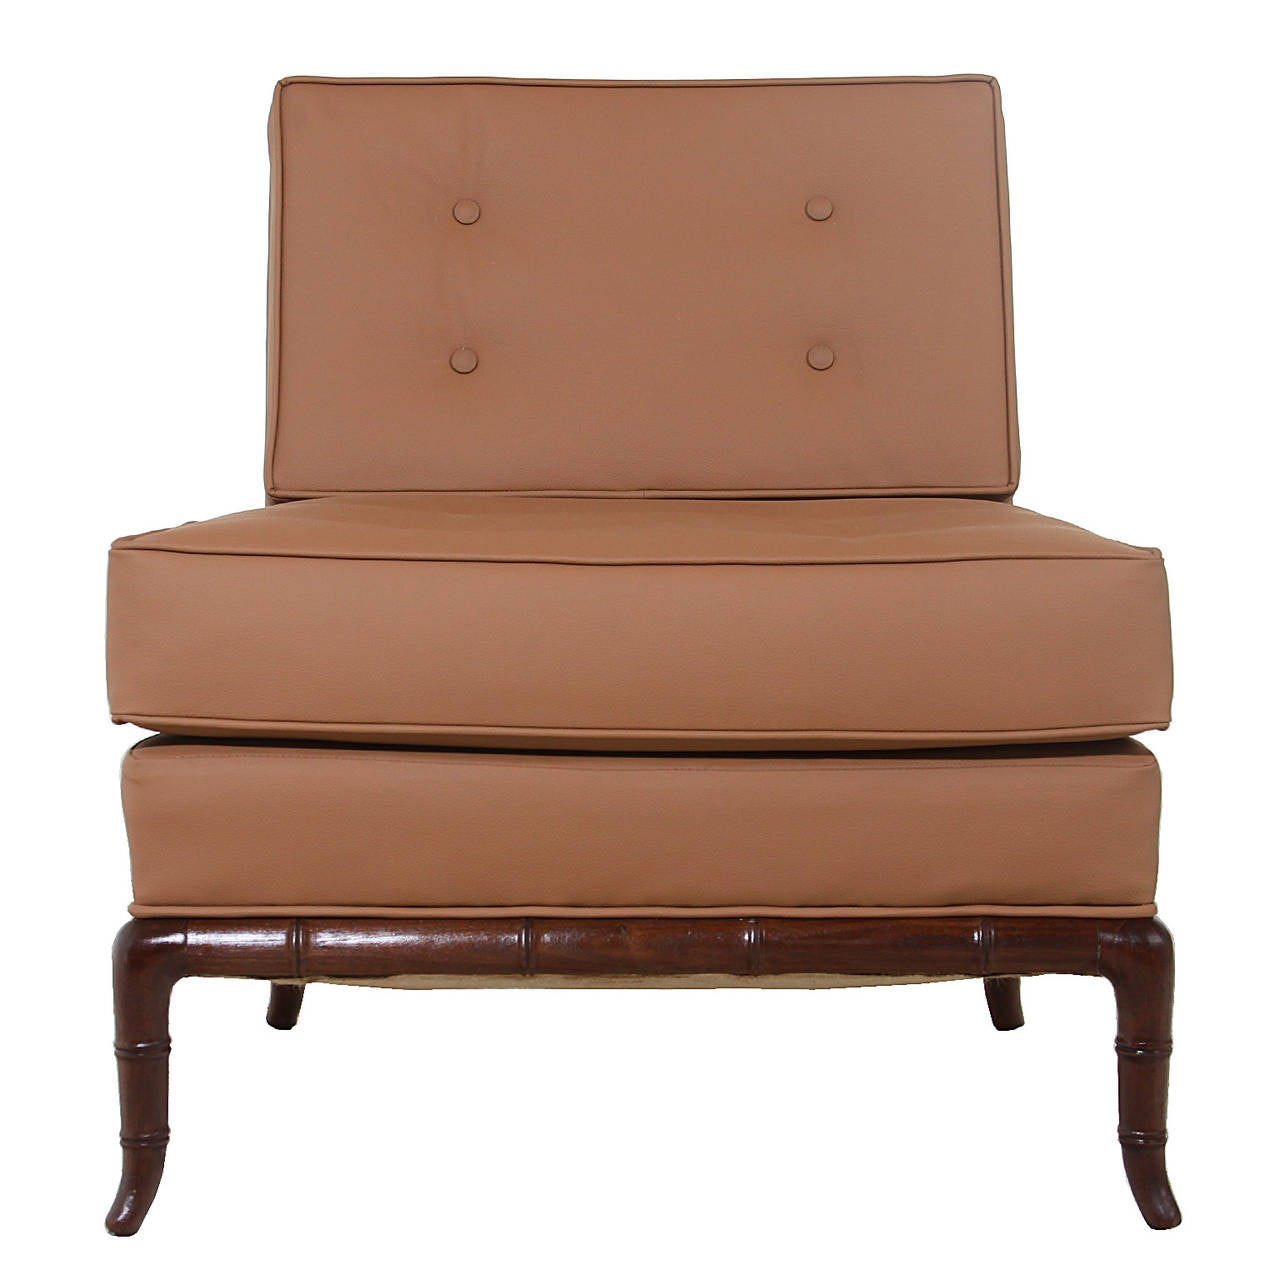 A single slipper chair with mahogany legs by Robsjohn-Gibbings for Widdicomb. The chair is upholstered in a tan leatherette with four tufted buttons on the seat and four tufted buttons on the back.

Measures: Seat depth 21.

 